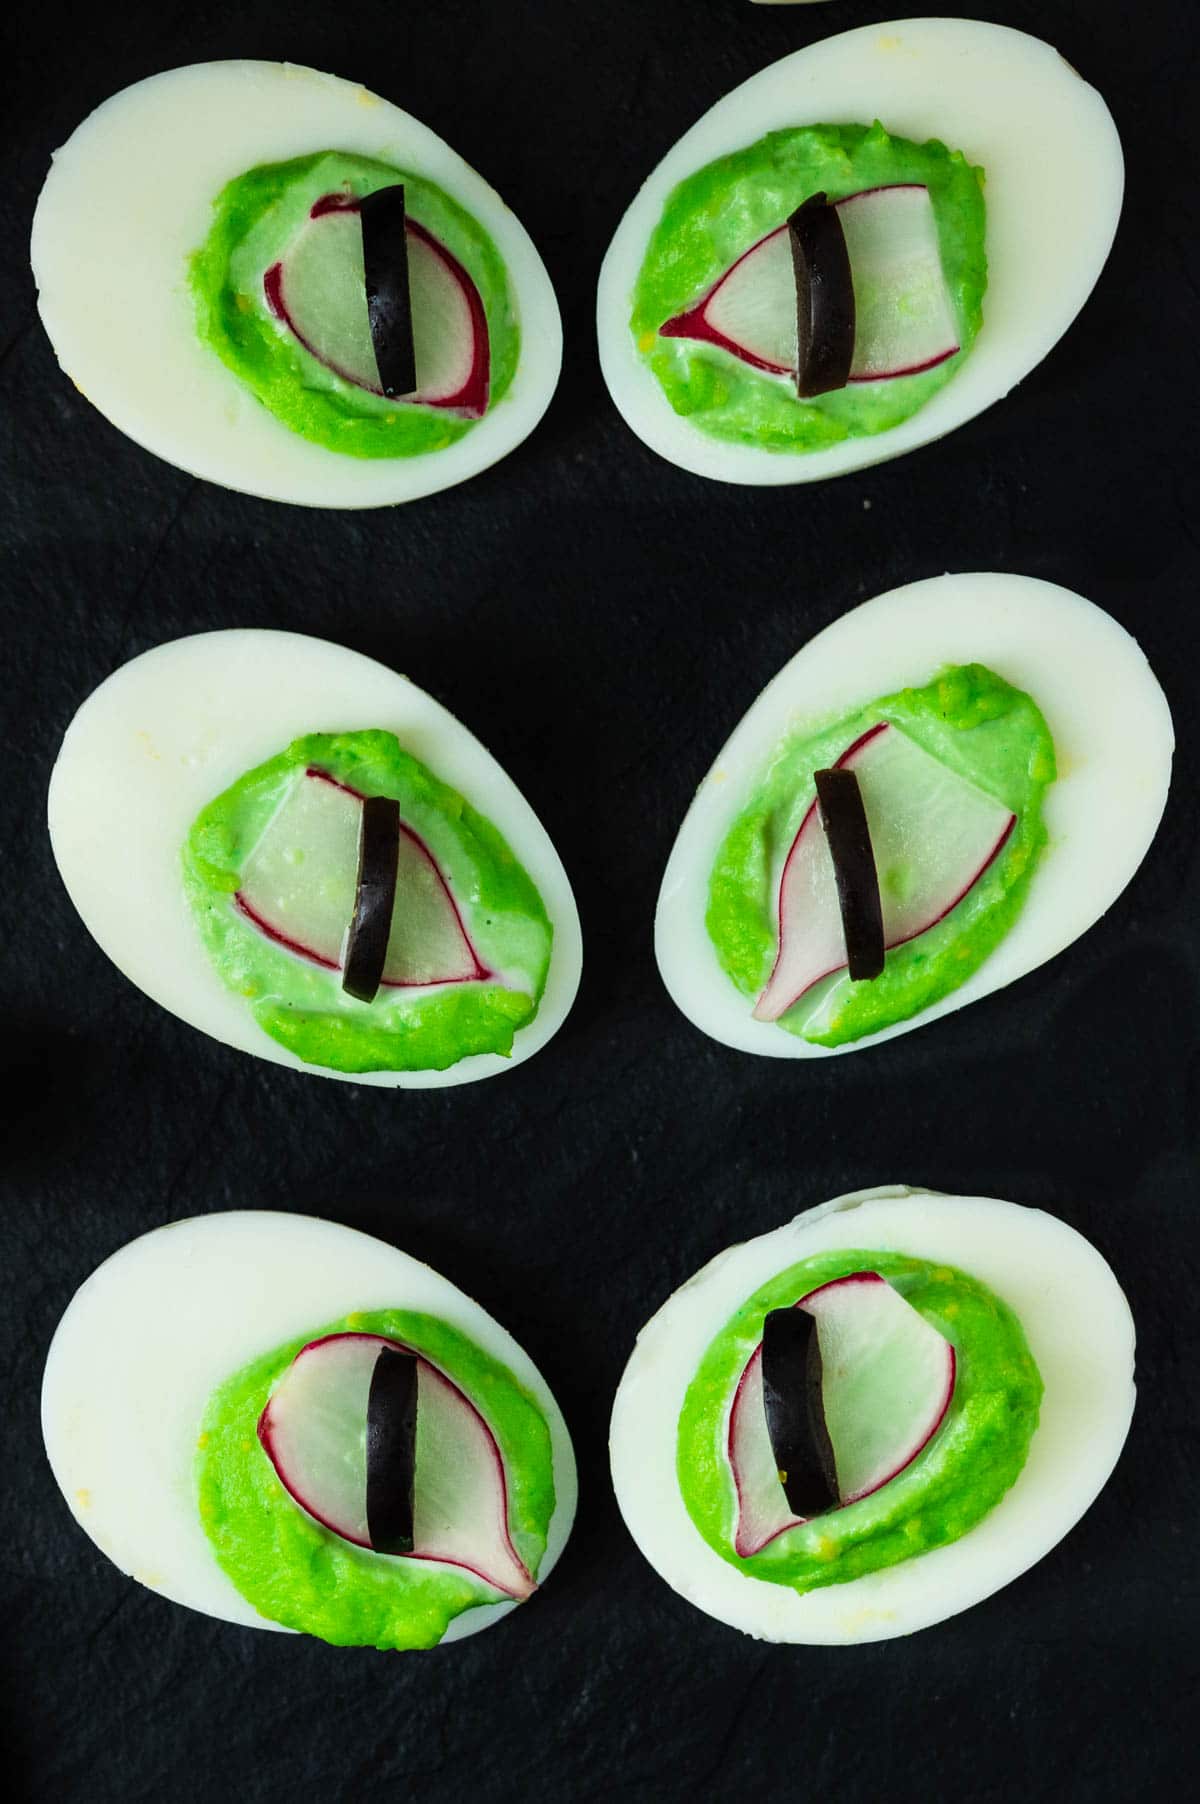 flavored deviled eggs decorated for halloween.